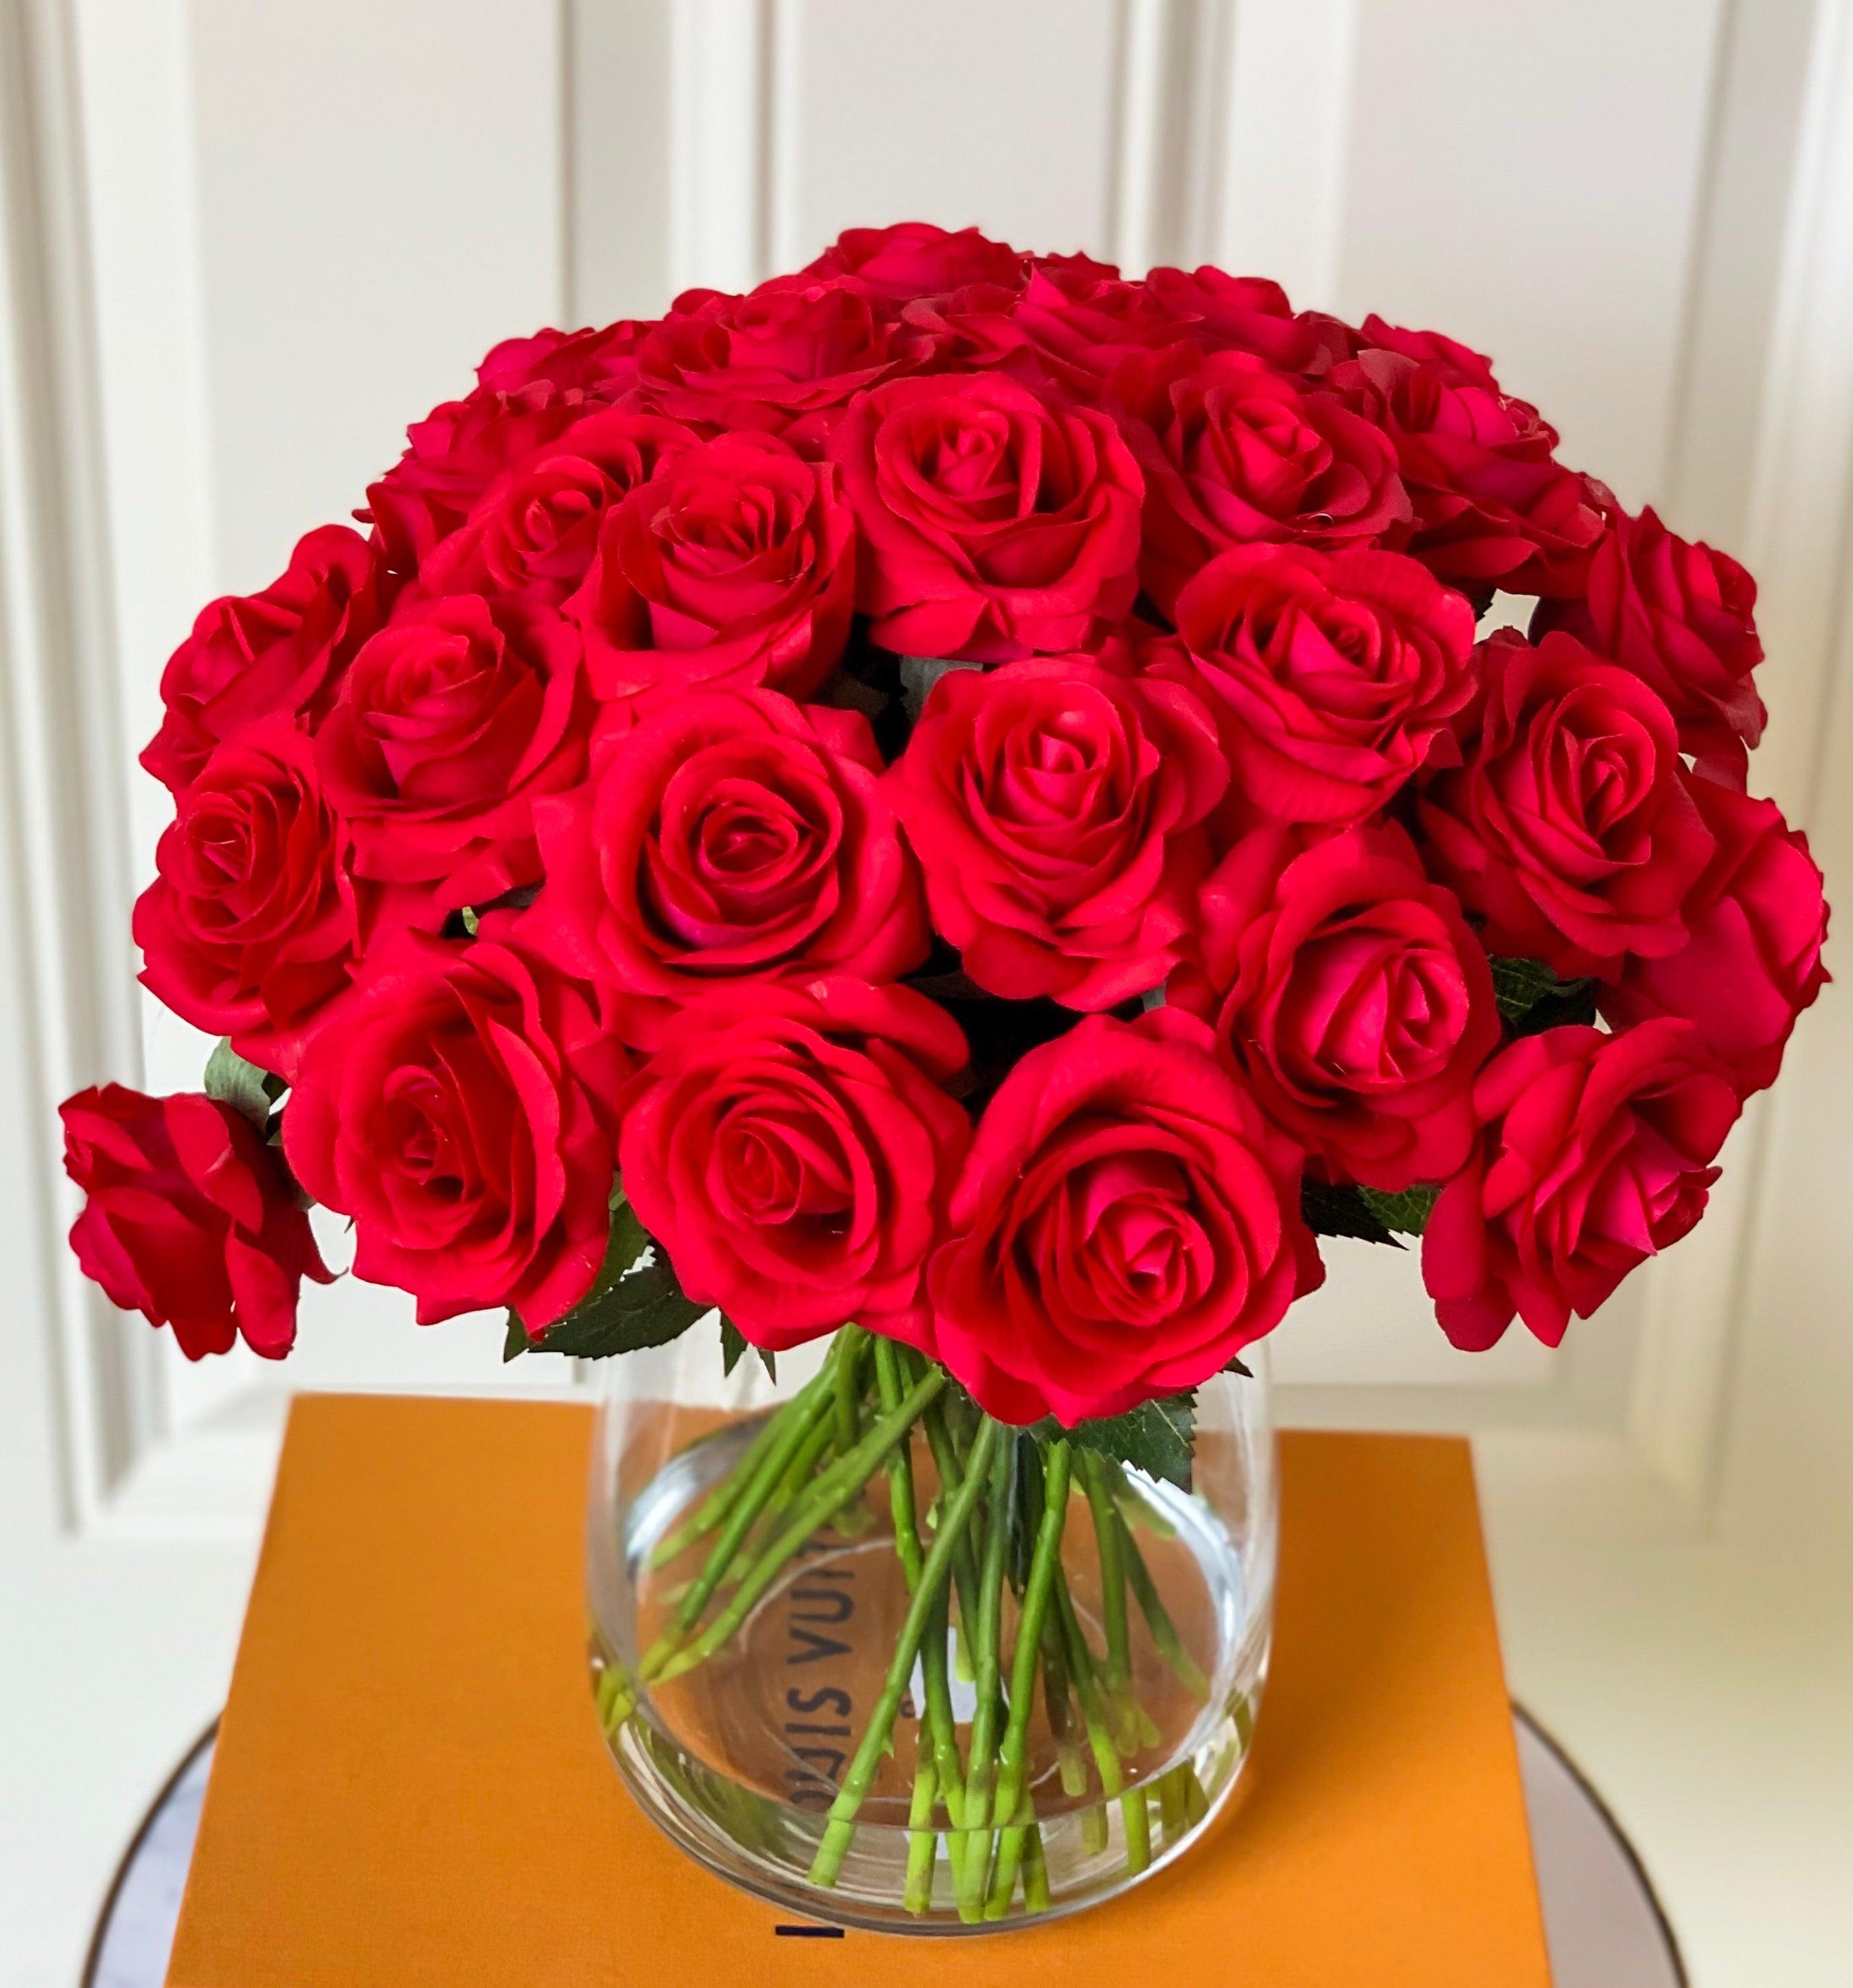 30 Large Real Touch Red Roses Arrangement - Flovery